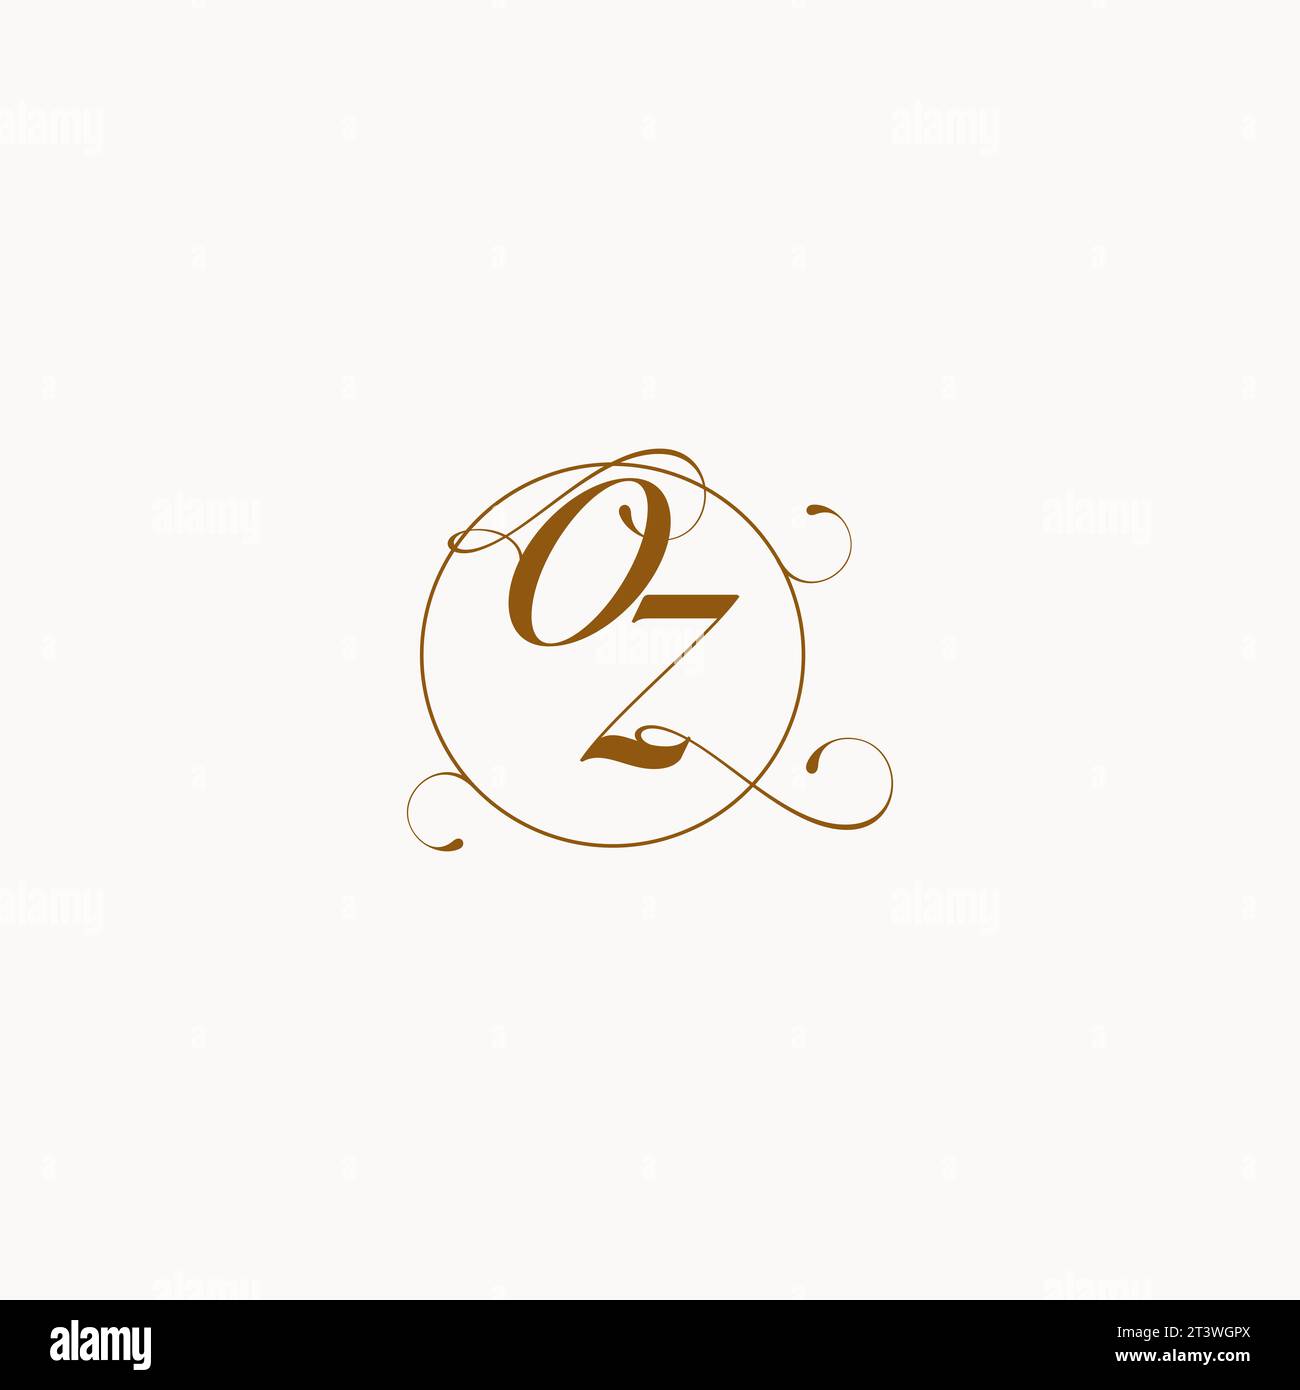 OZ uniquely wedding logo symbol of your marriage and you can use it on your wedding stationary Stock Vector